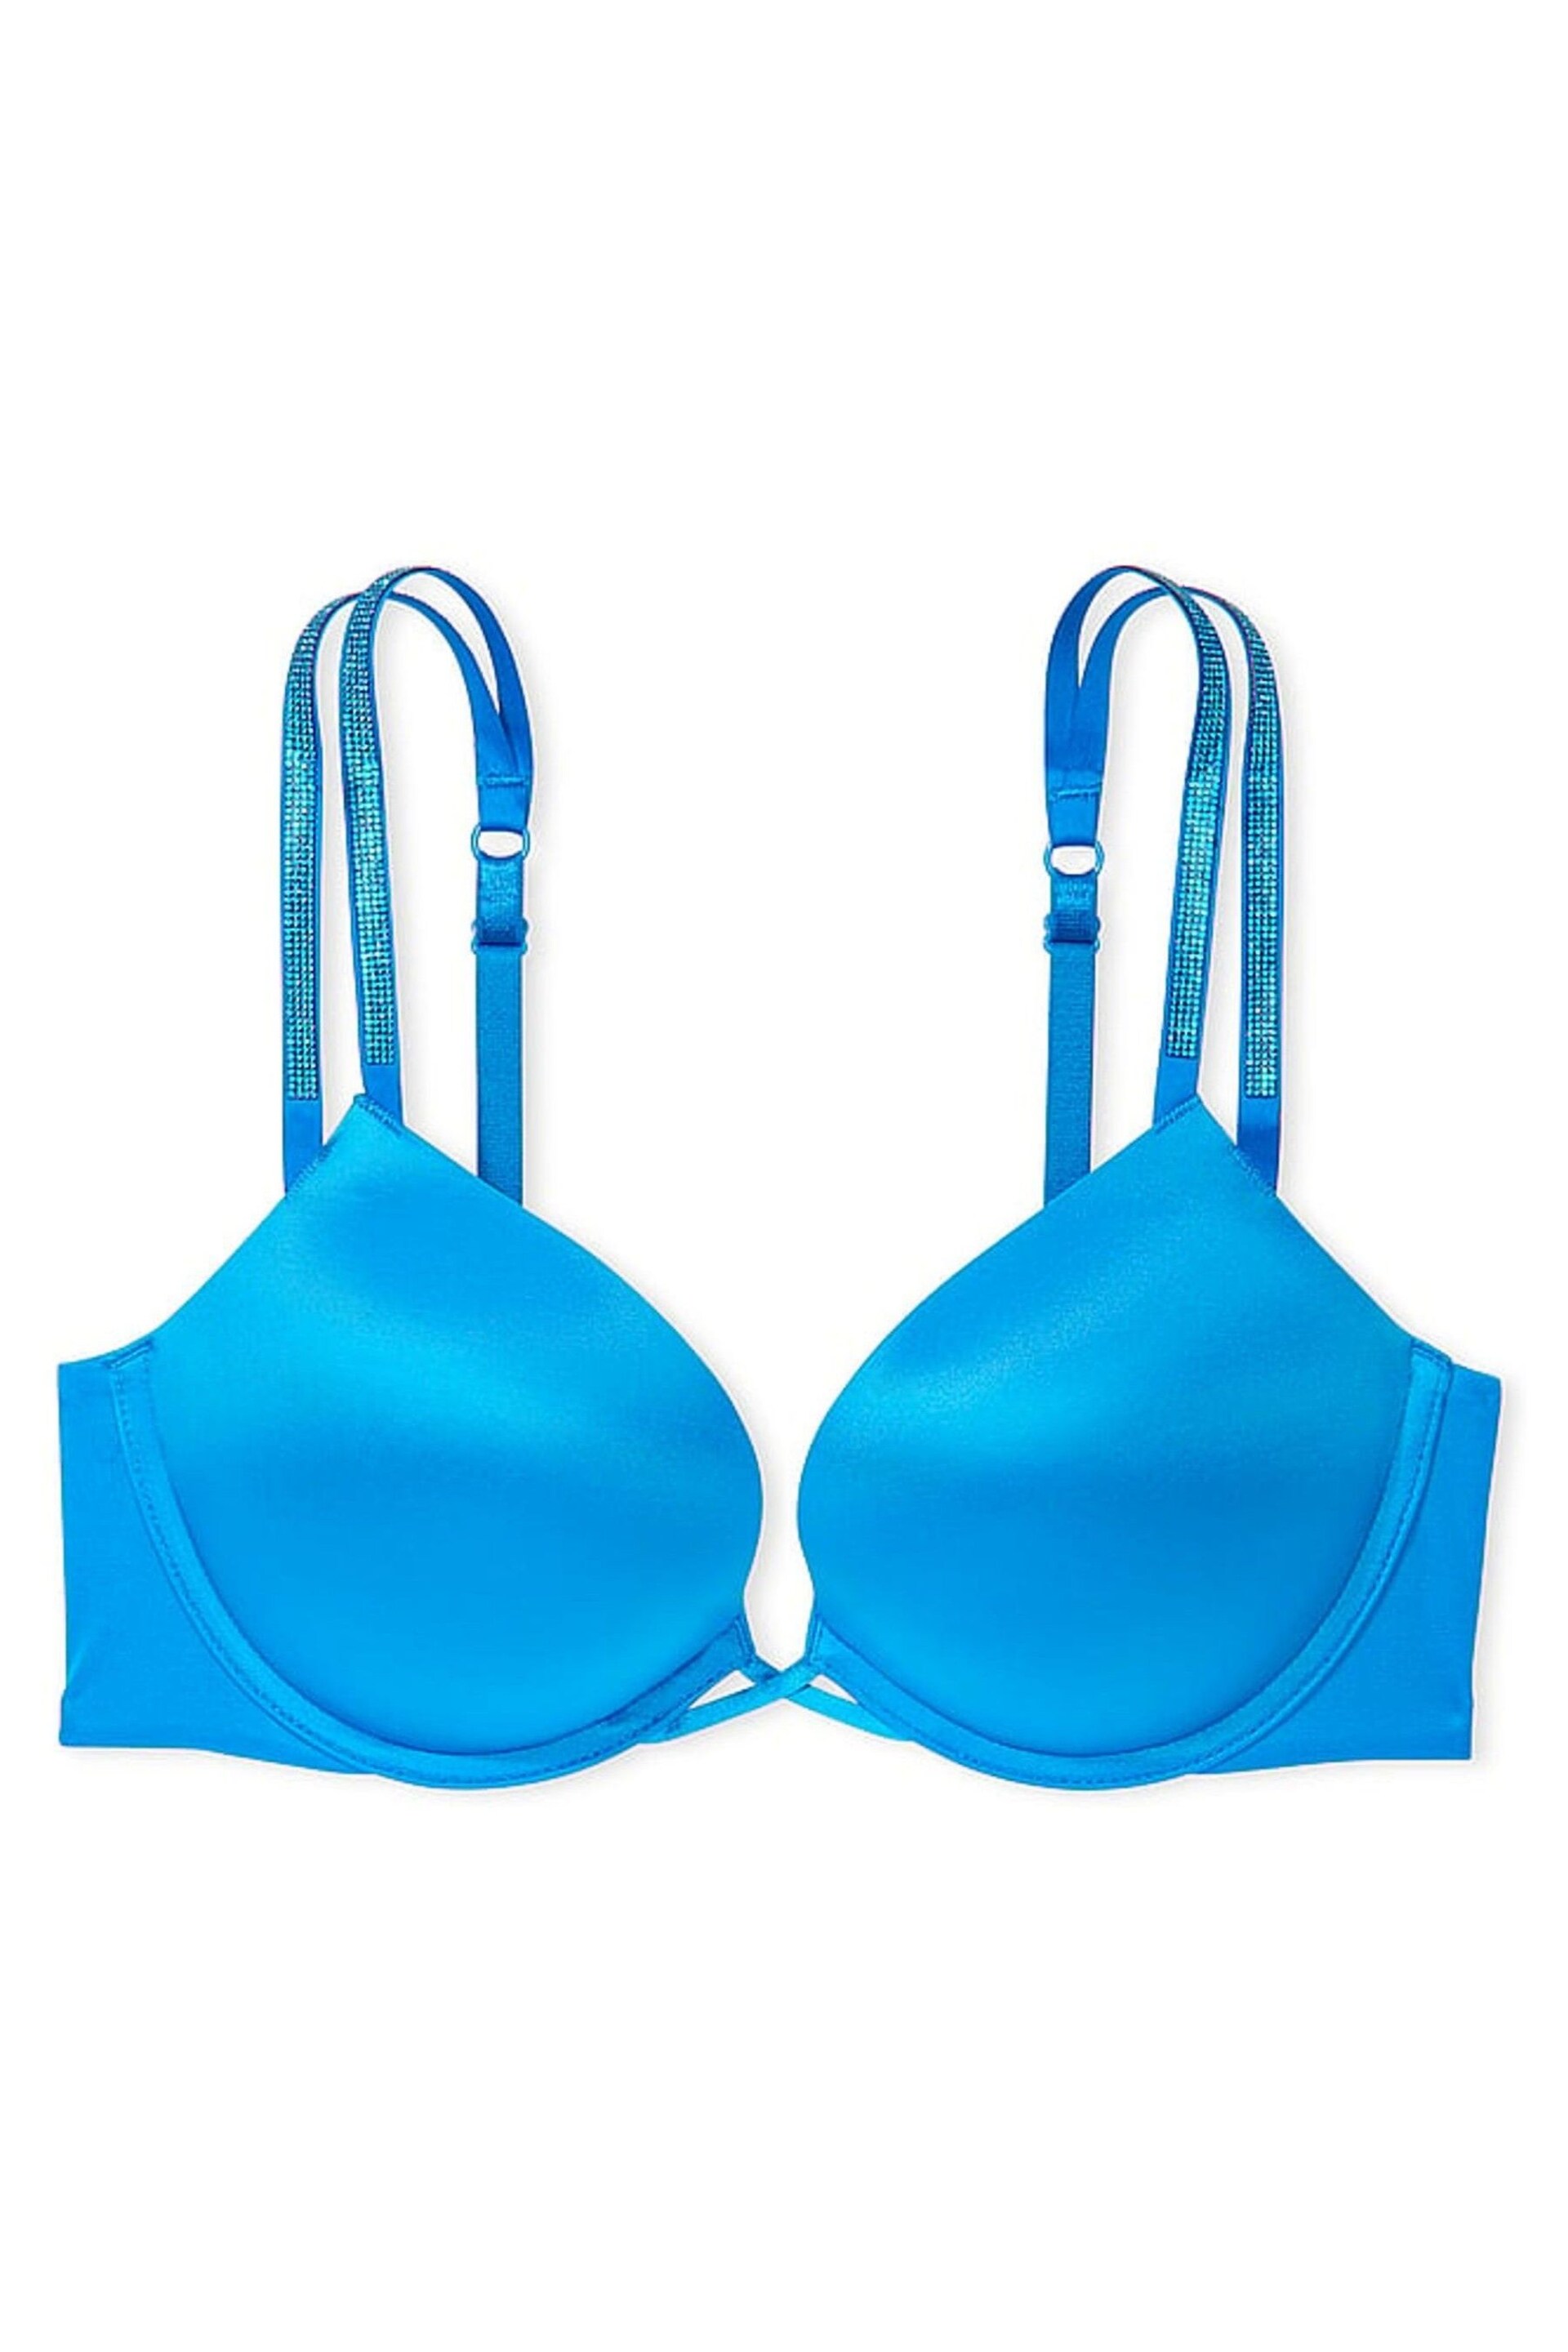 Victoria's Secret Shocking Blue Lace Add 2 Cups Push Up Double Shine Strap Add 2 Cups Push Up Bombshell Bra - Image 3 of 4